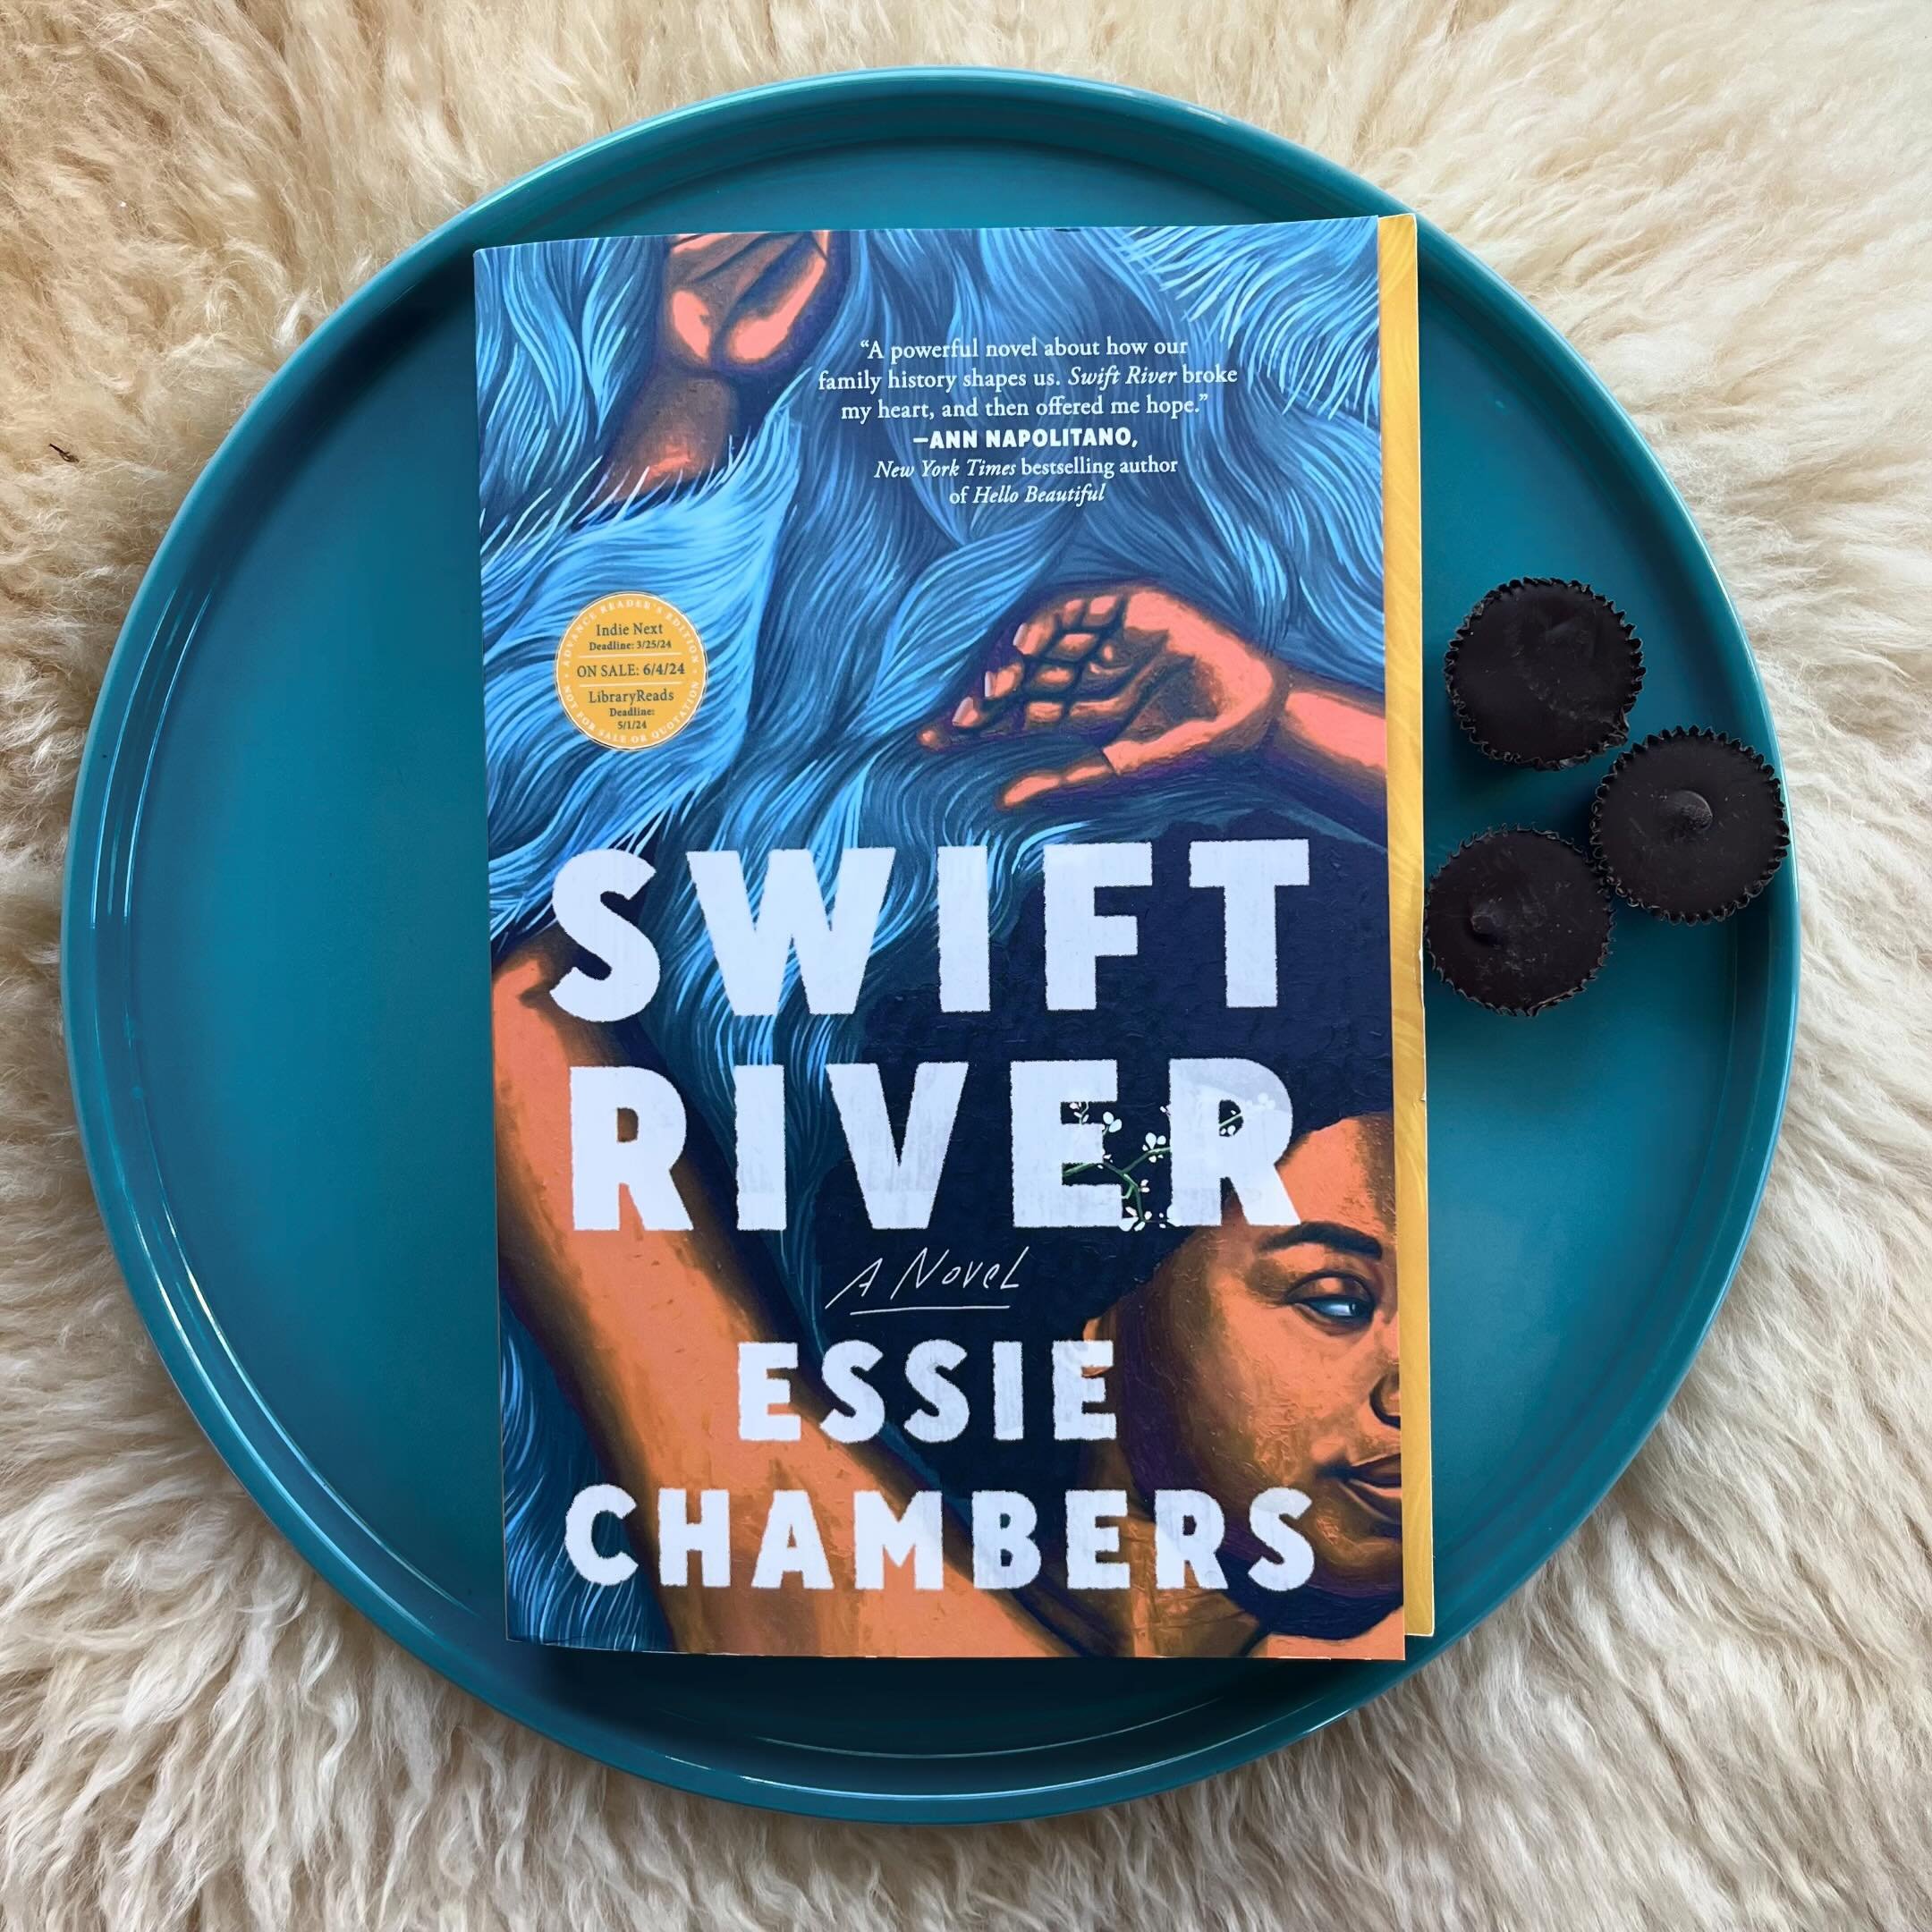 You are about to see this novel EVERYWHERE, and for damn good reason. Like @essiejchambers herself, SWIFT RIVER embodies compassion, making itself big enough to hold even the most painful elements of familial and American life. I promise you will fal